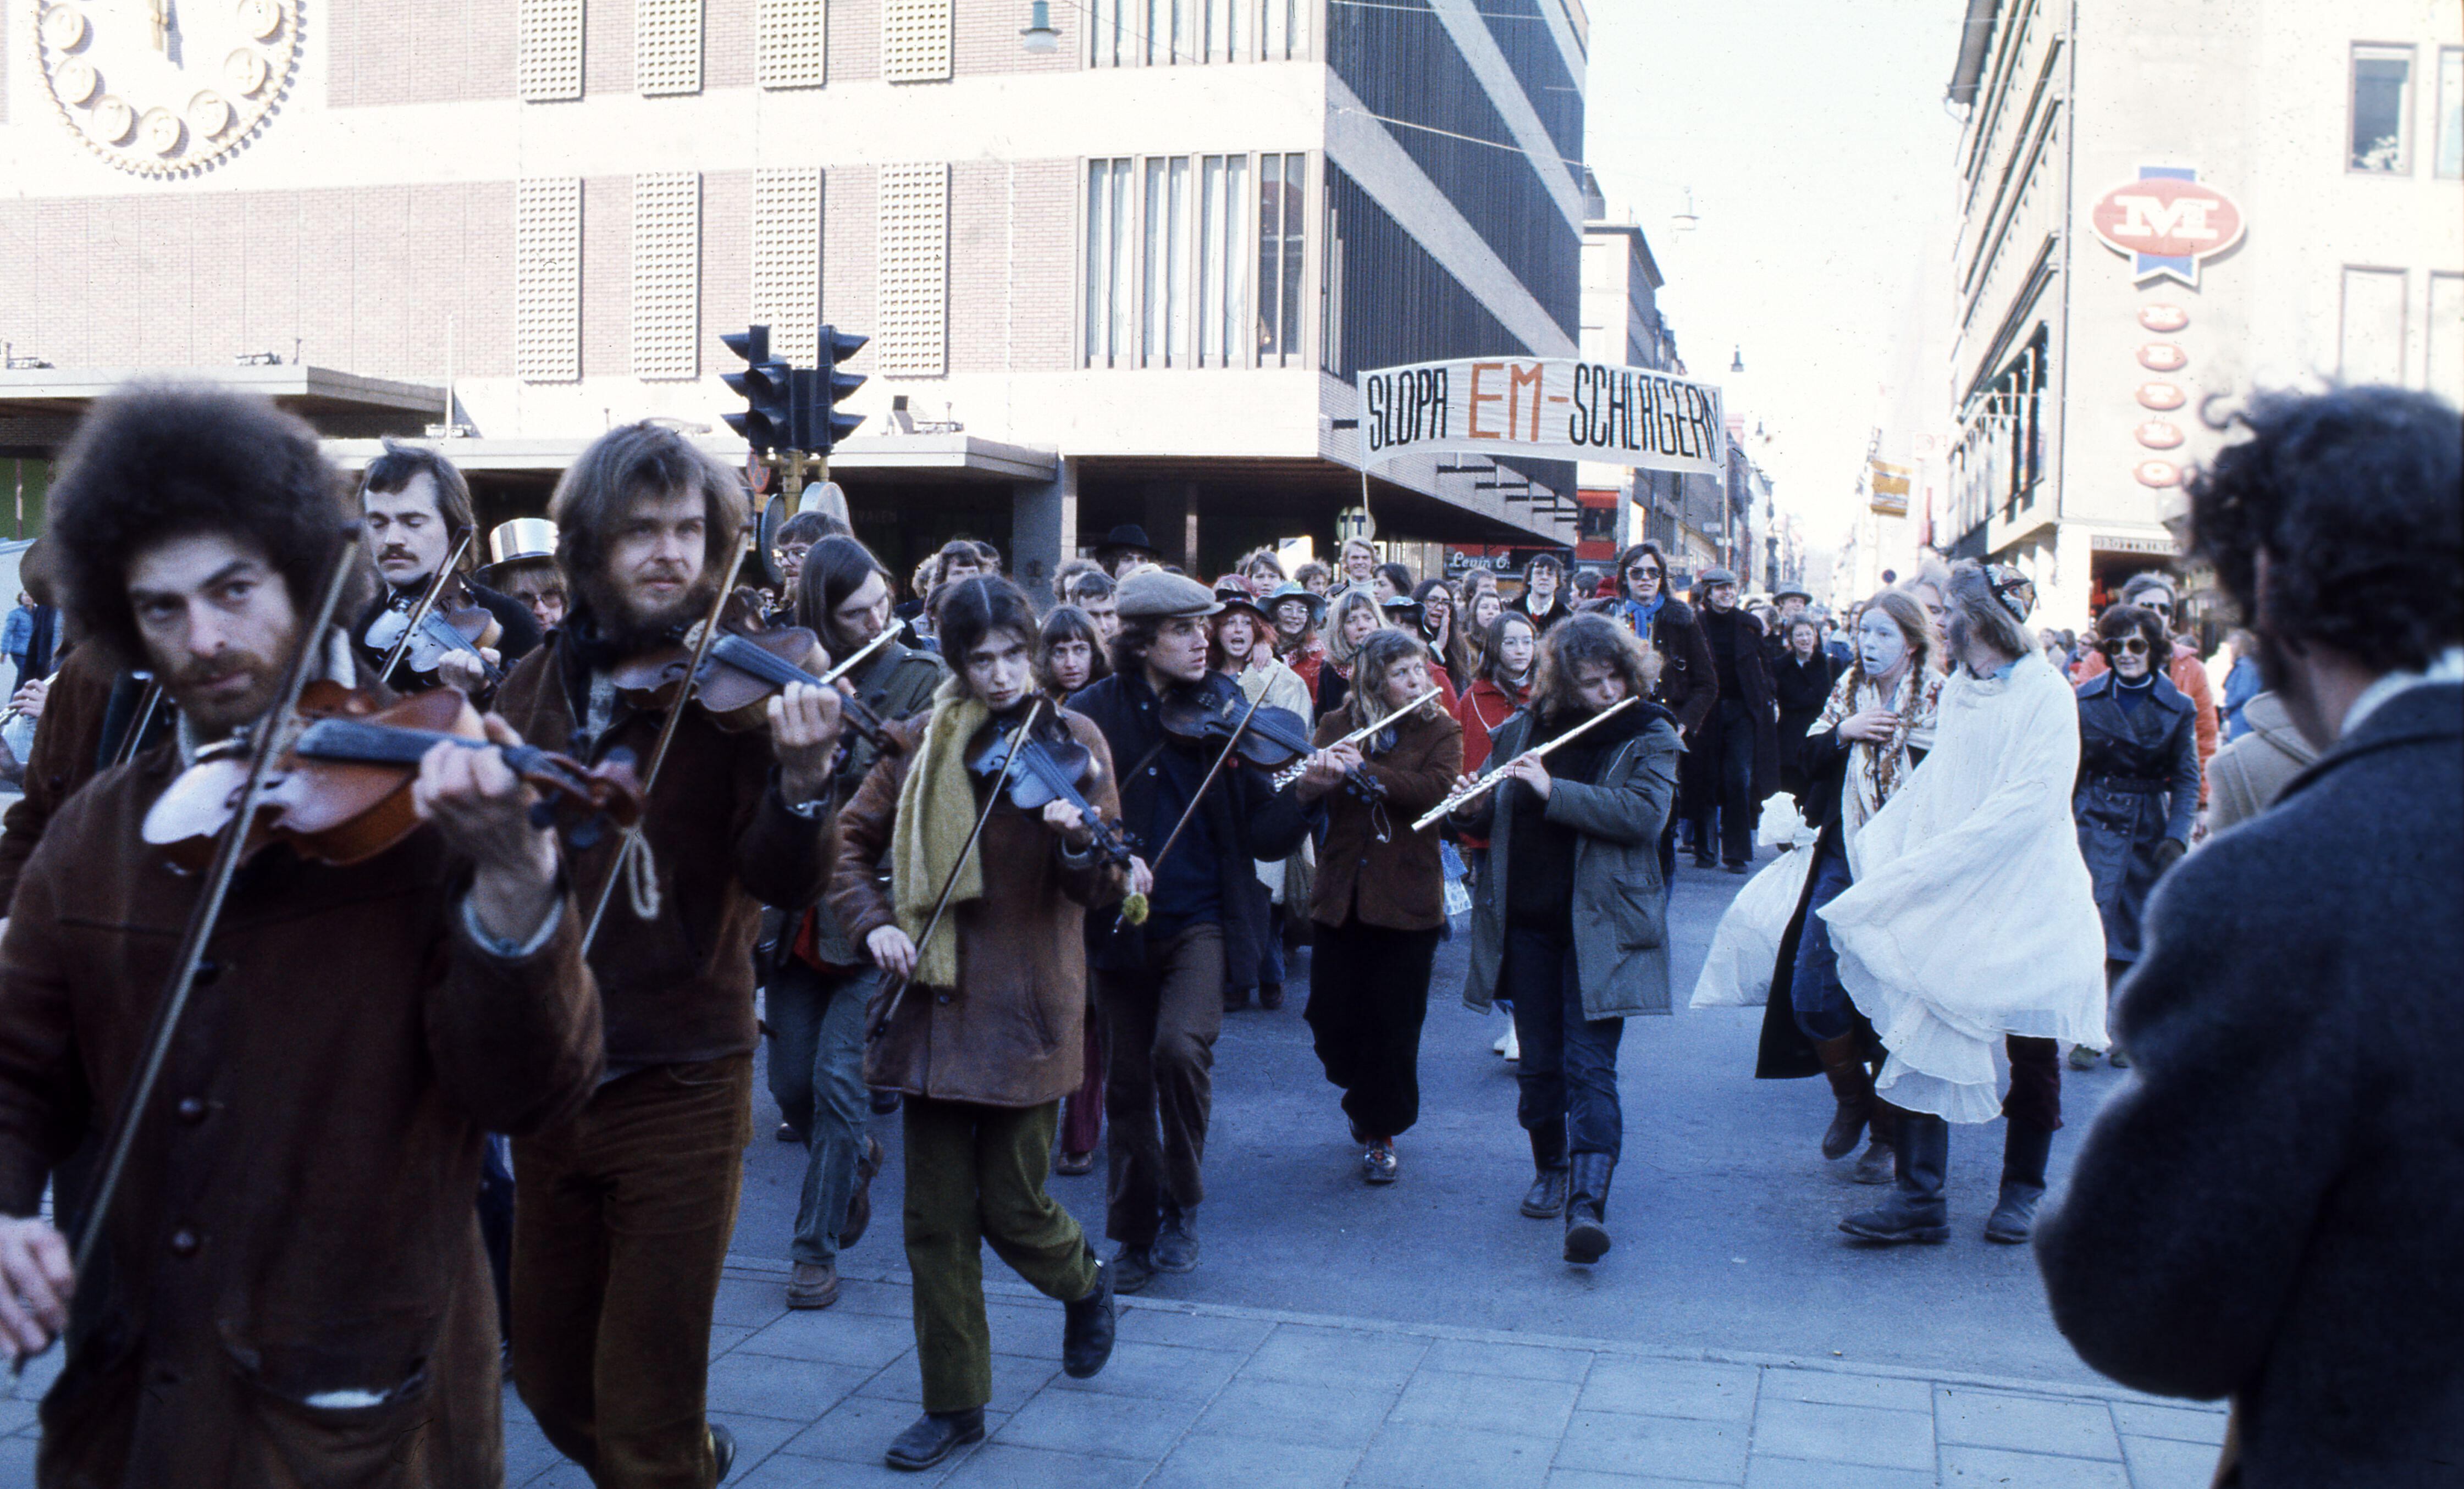 Demonstration against the Eurovision Song Contest, on March 22, 1975 in Stockholm.